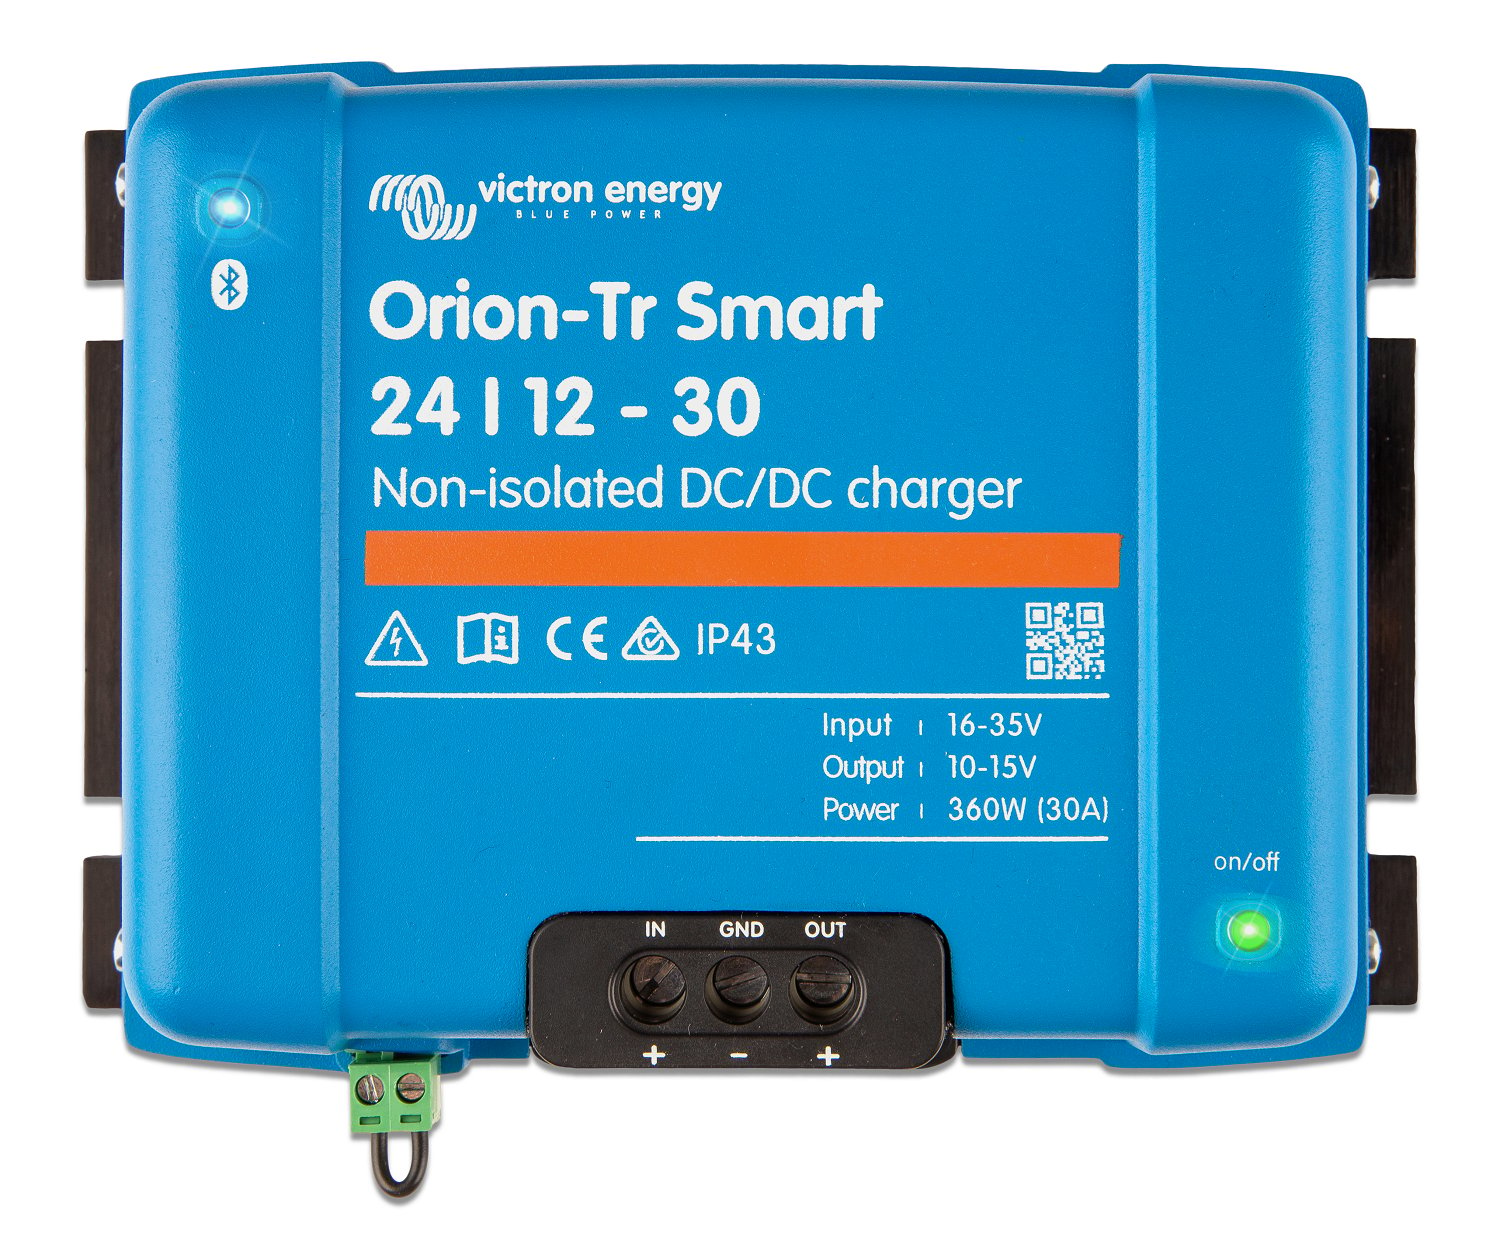 What is the difference between the isolated and non-isolated Orion Victors Battery to Battery chargers? 